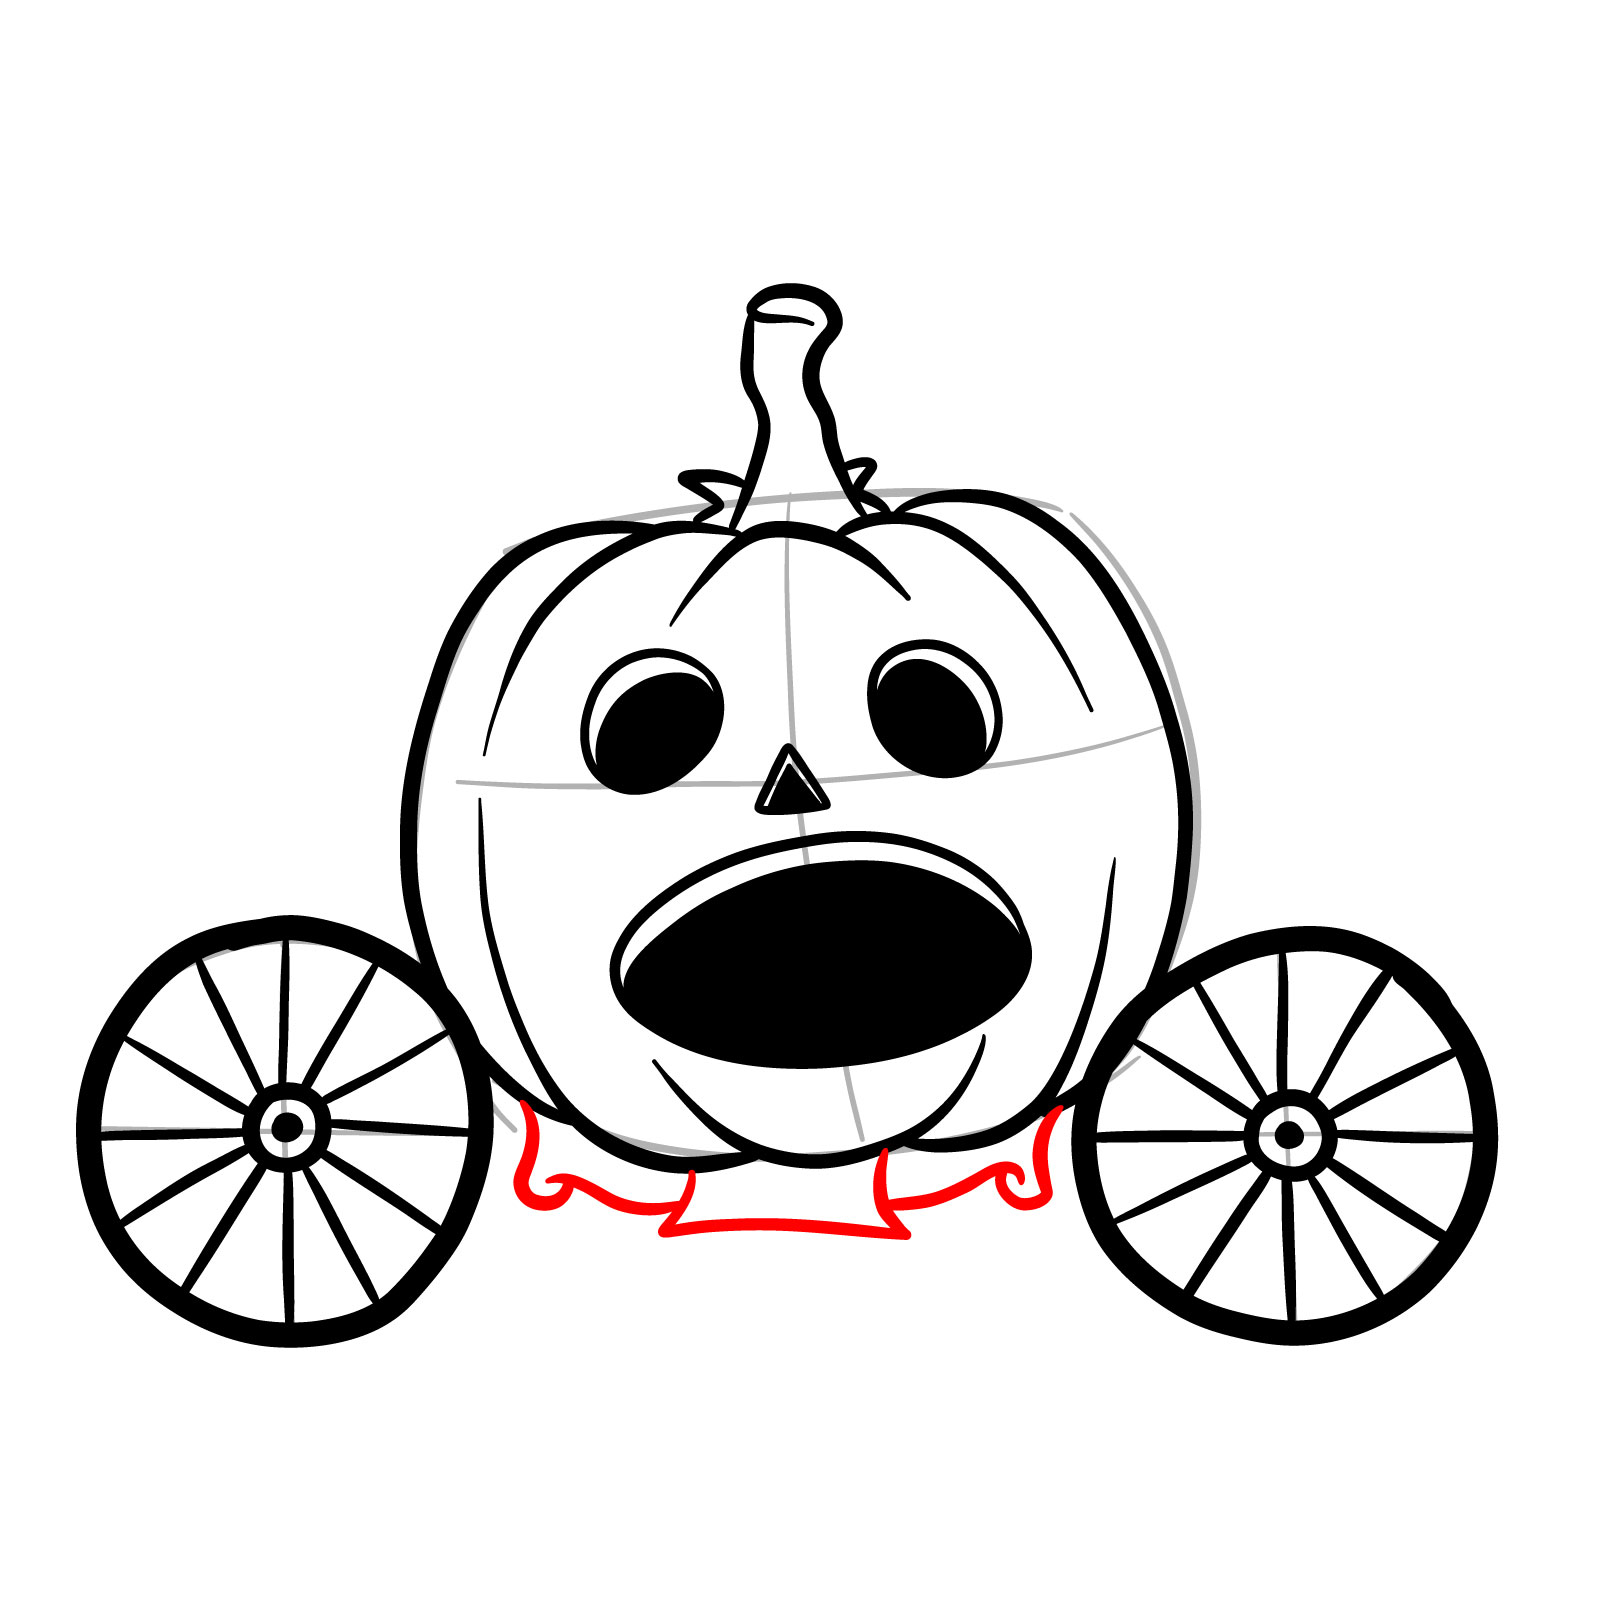 How to draw a Pumpkin Carriage - step 14